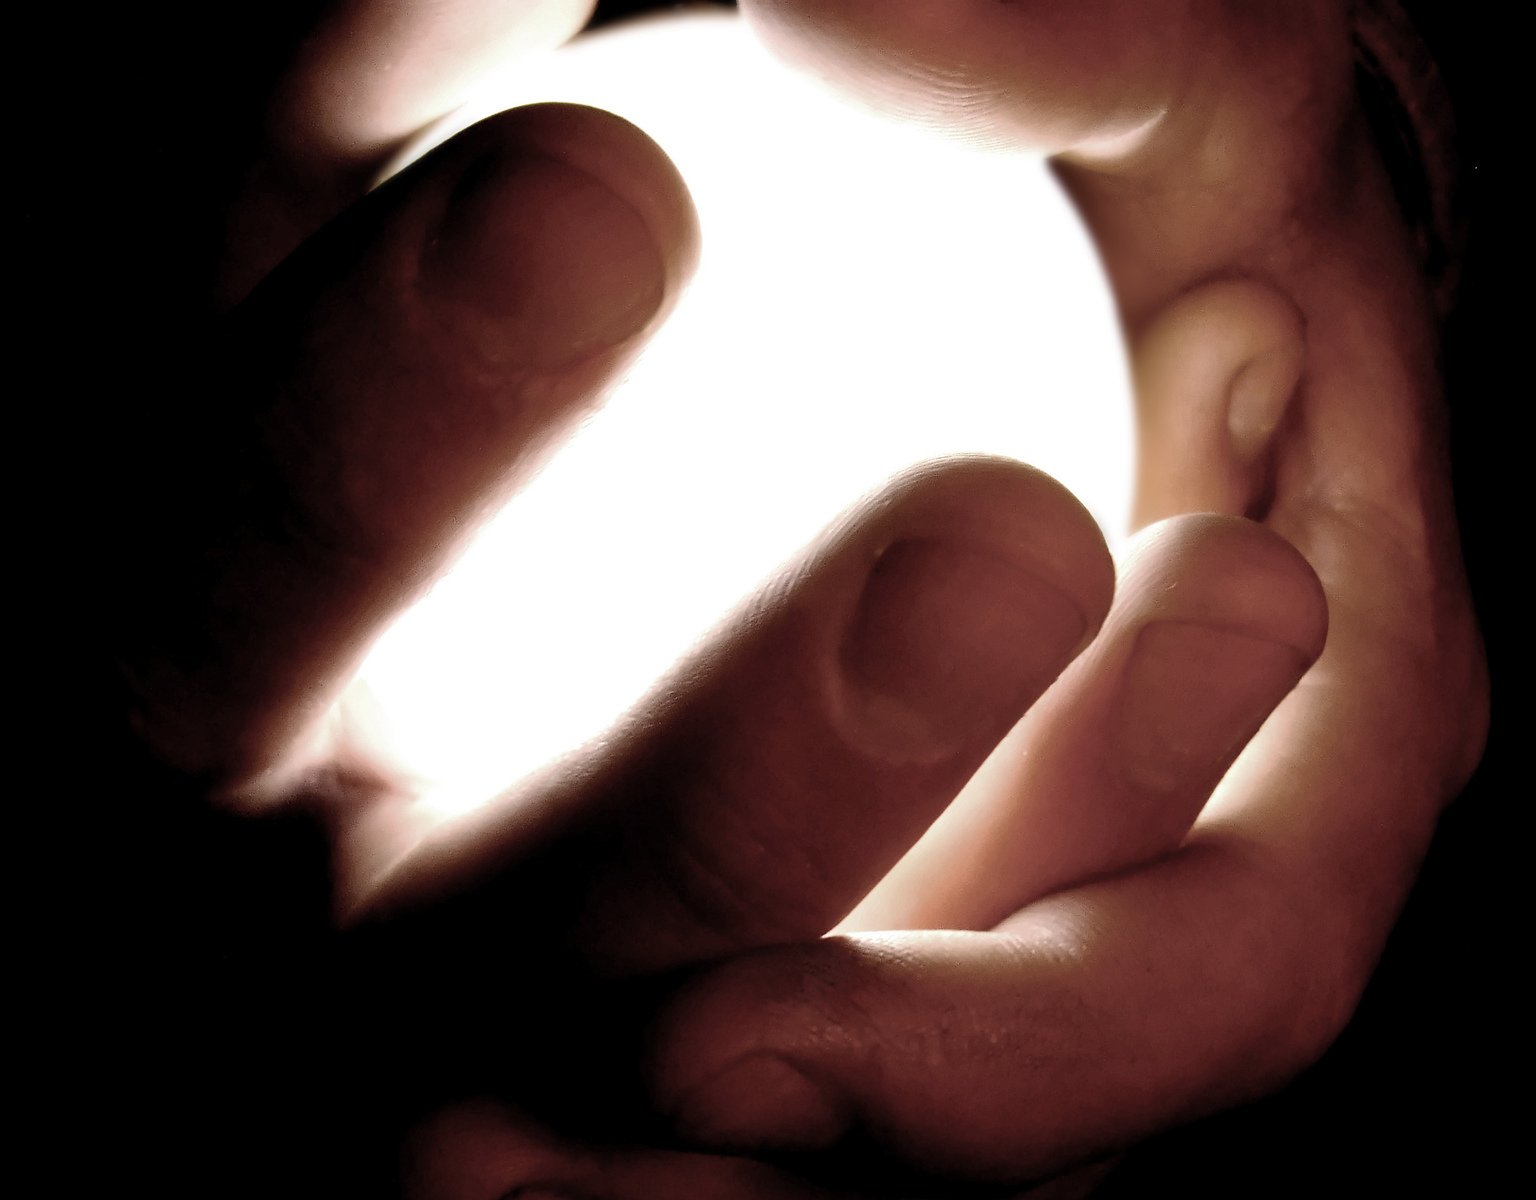 light being projected from an open hand that shows the light